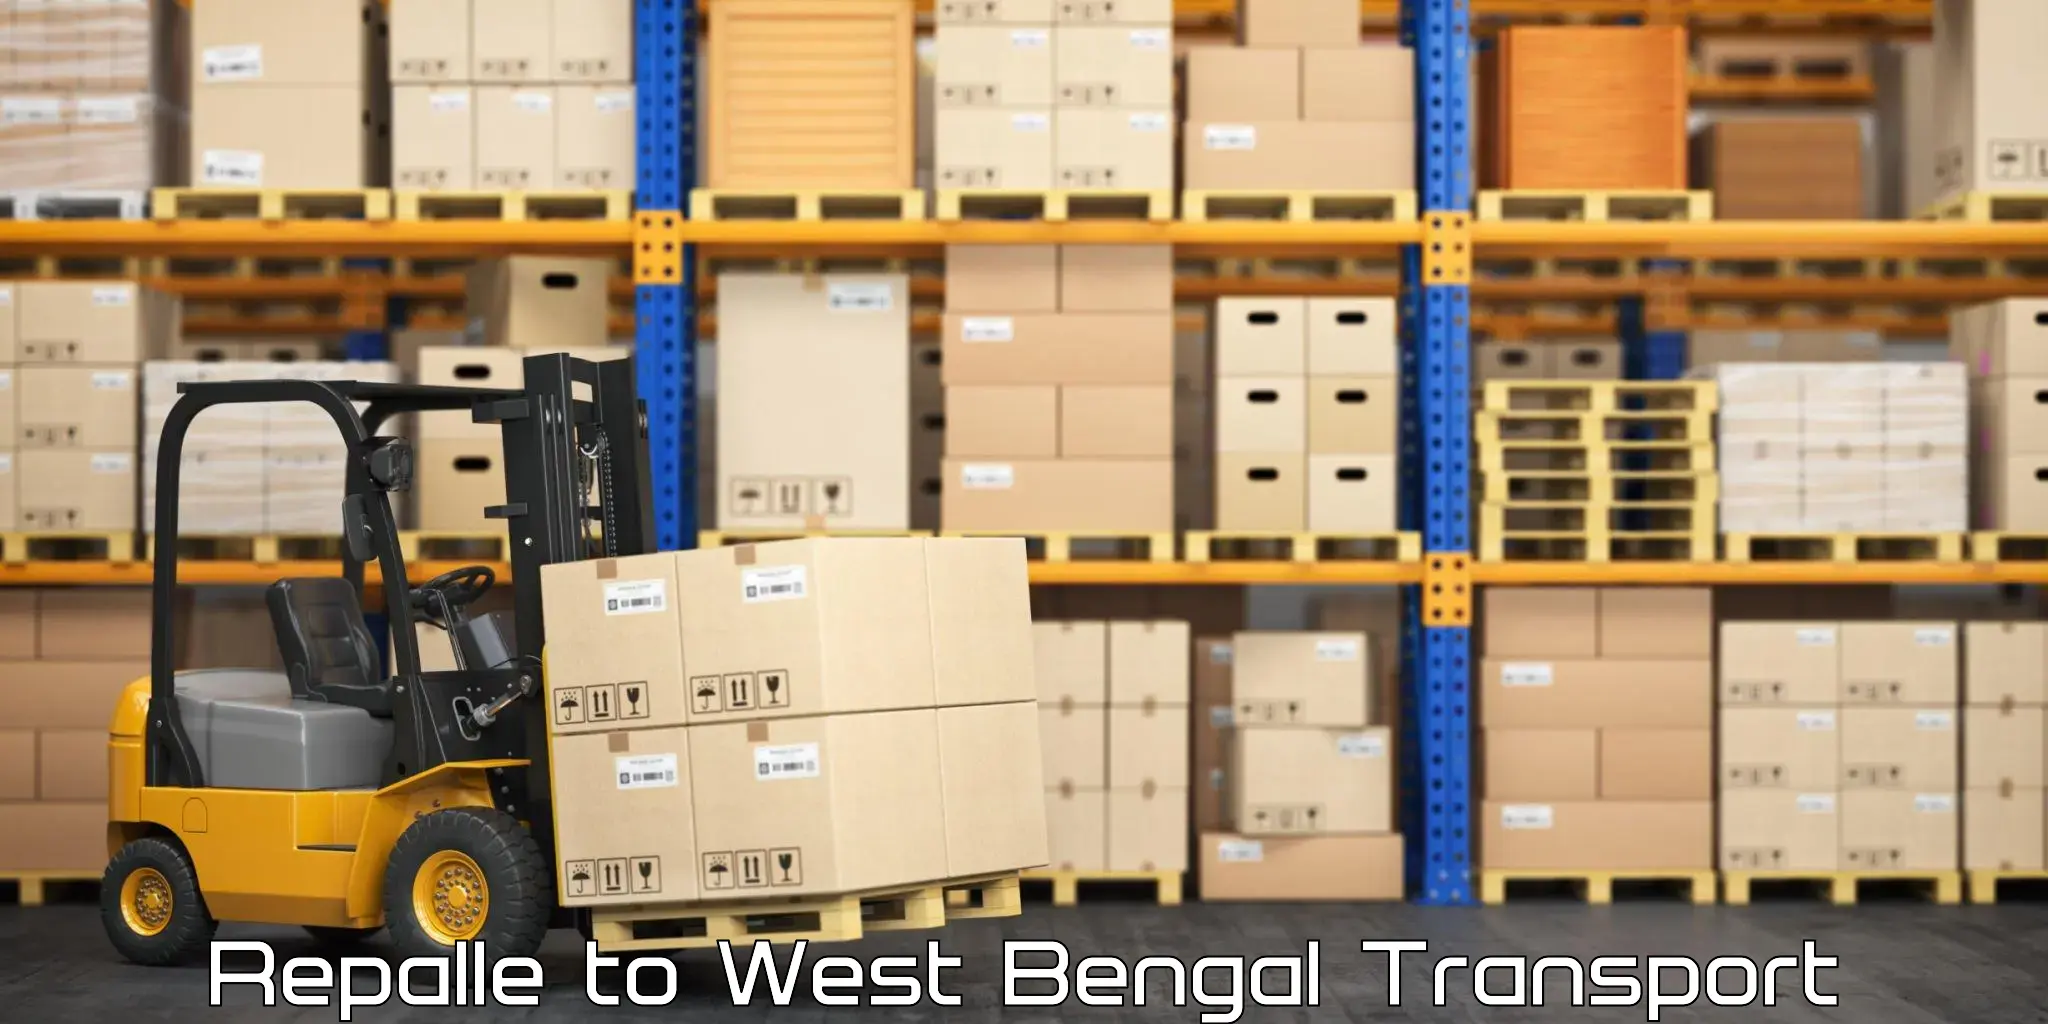 Container transportation services Repalle to West Bengal